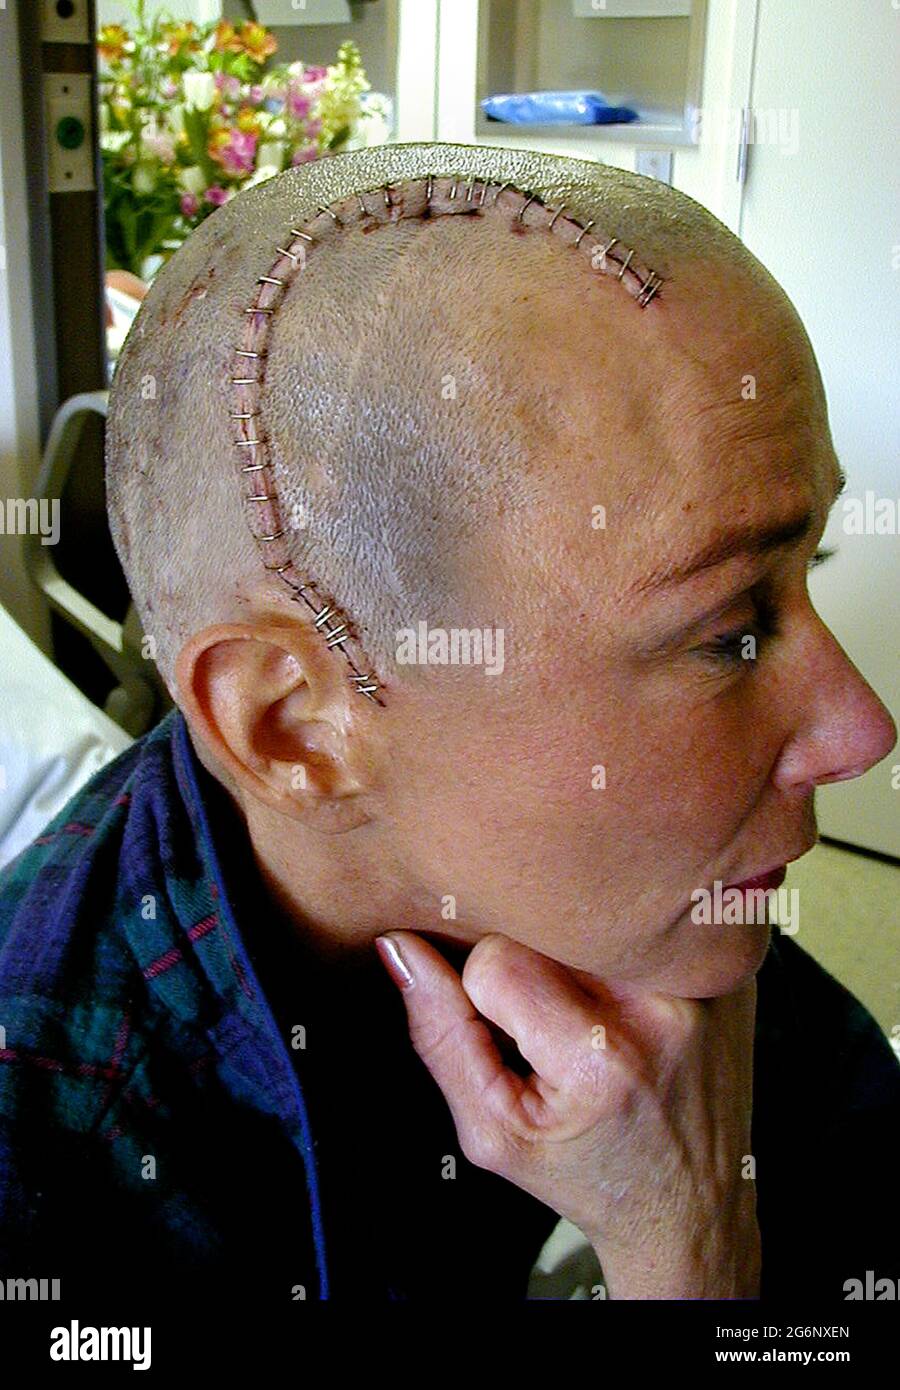 A bald American woman who suffered from epilepsy displays the stainless  steel staples that were used to close a large incision in her head after an  operation on her brain. Her hair